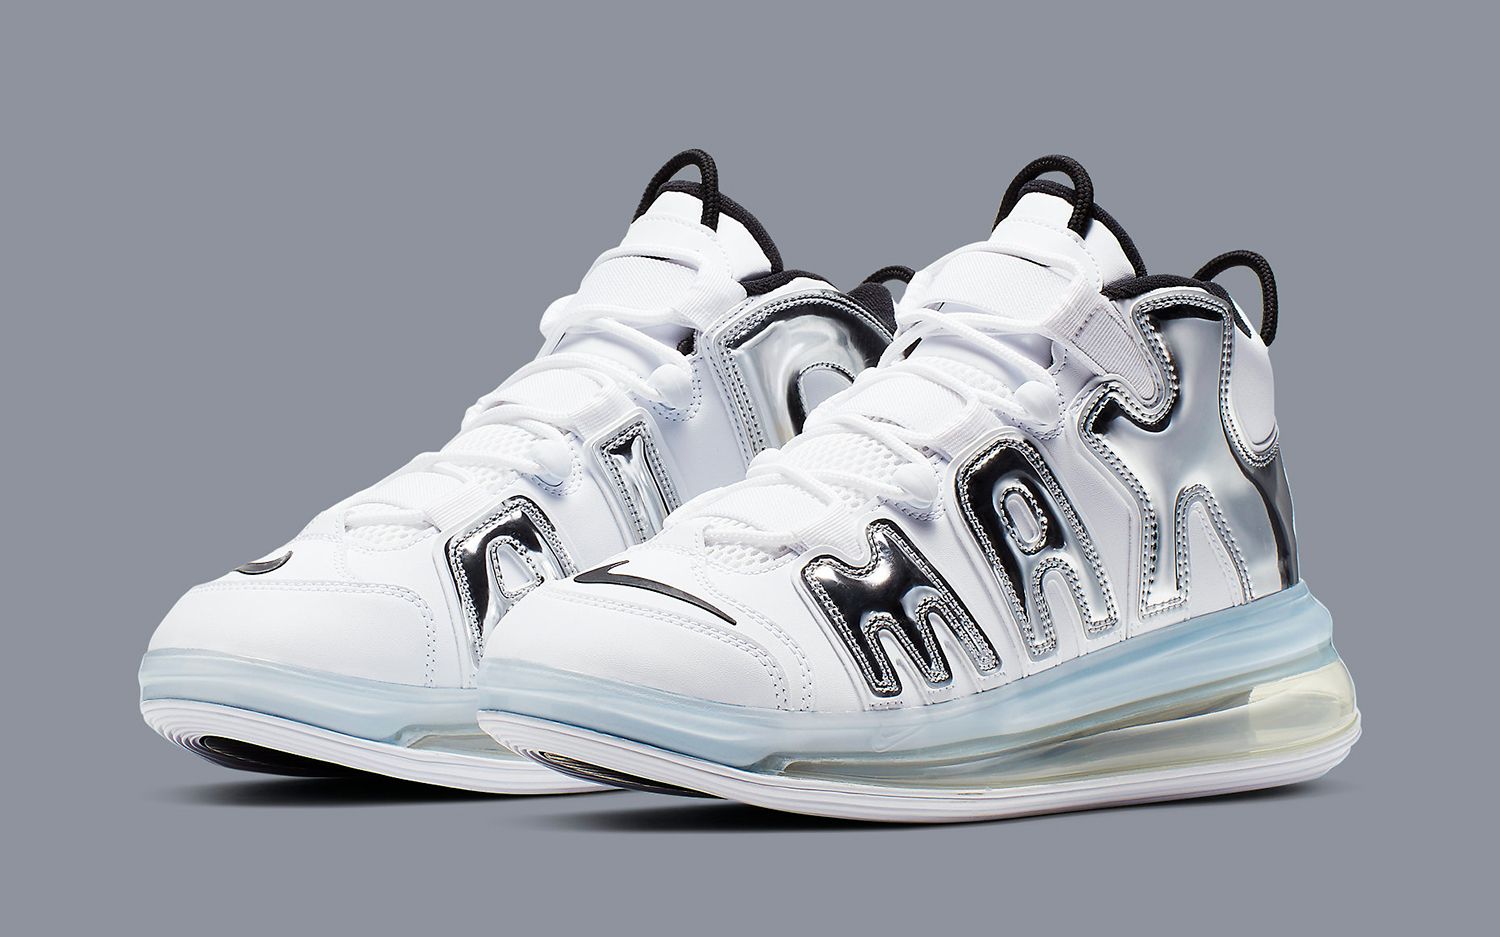 The Nike Air More Uptempo 720 Now Wears “White Chrome” | House of